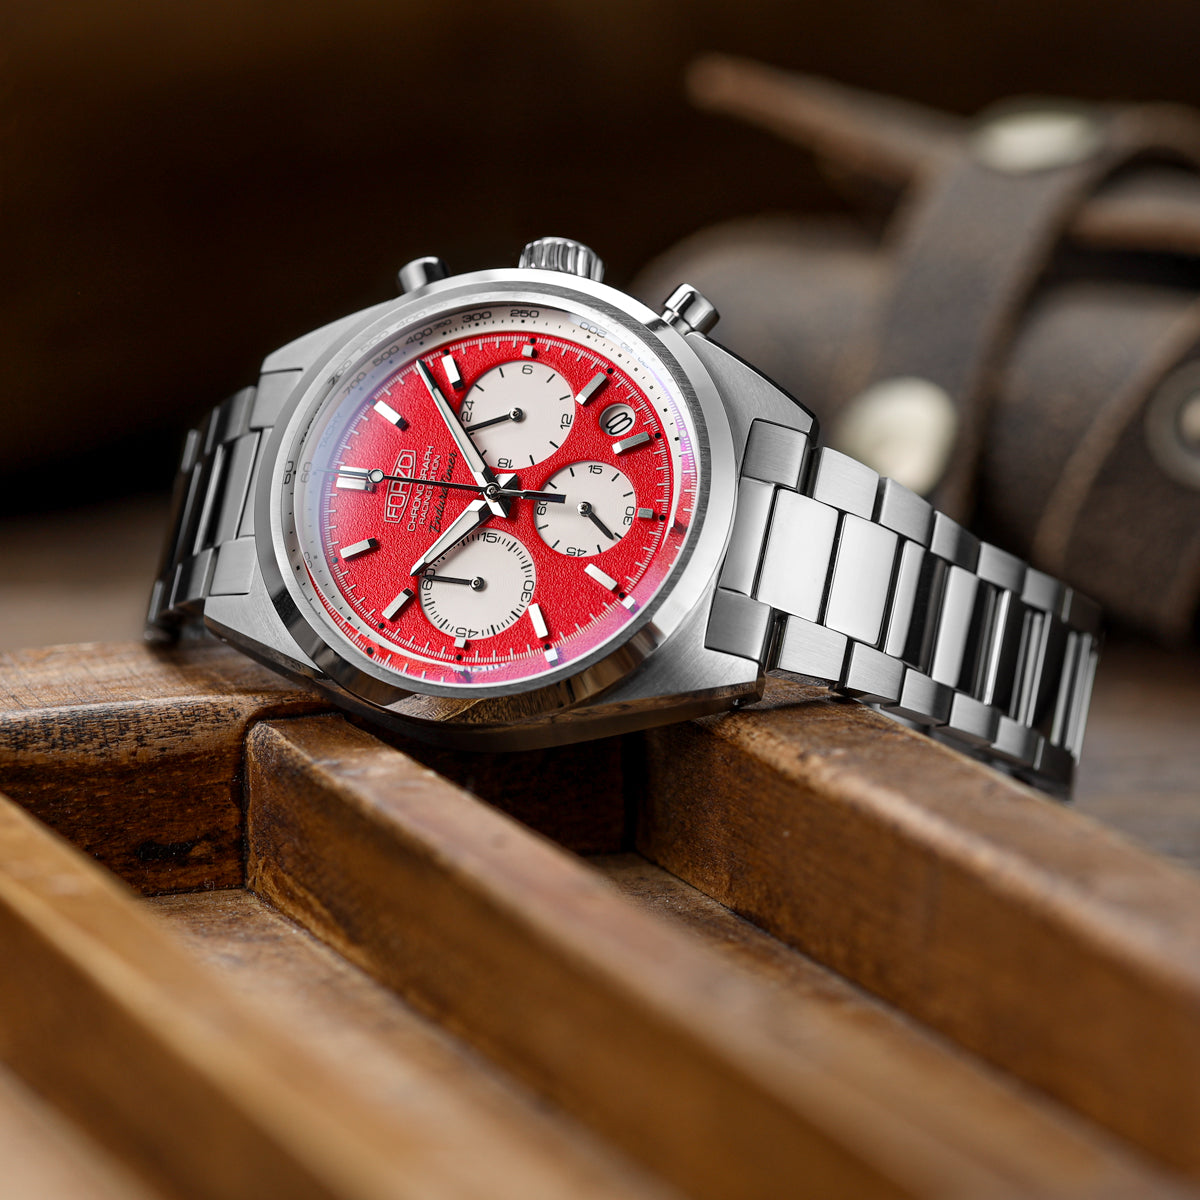 Limited Edition Carl Fogarty 'Foggy' Chronograph Watch | Red and White - additional image 1